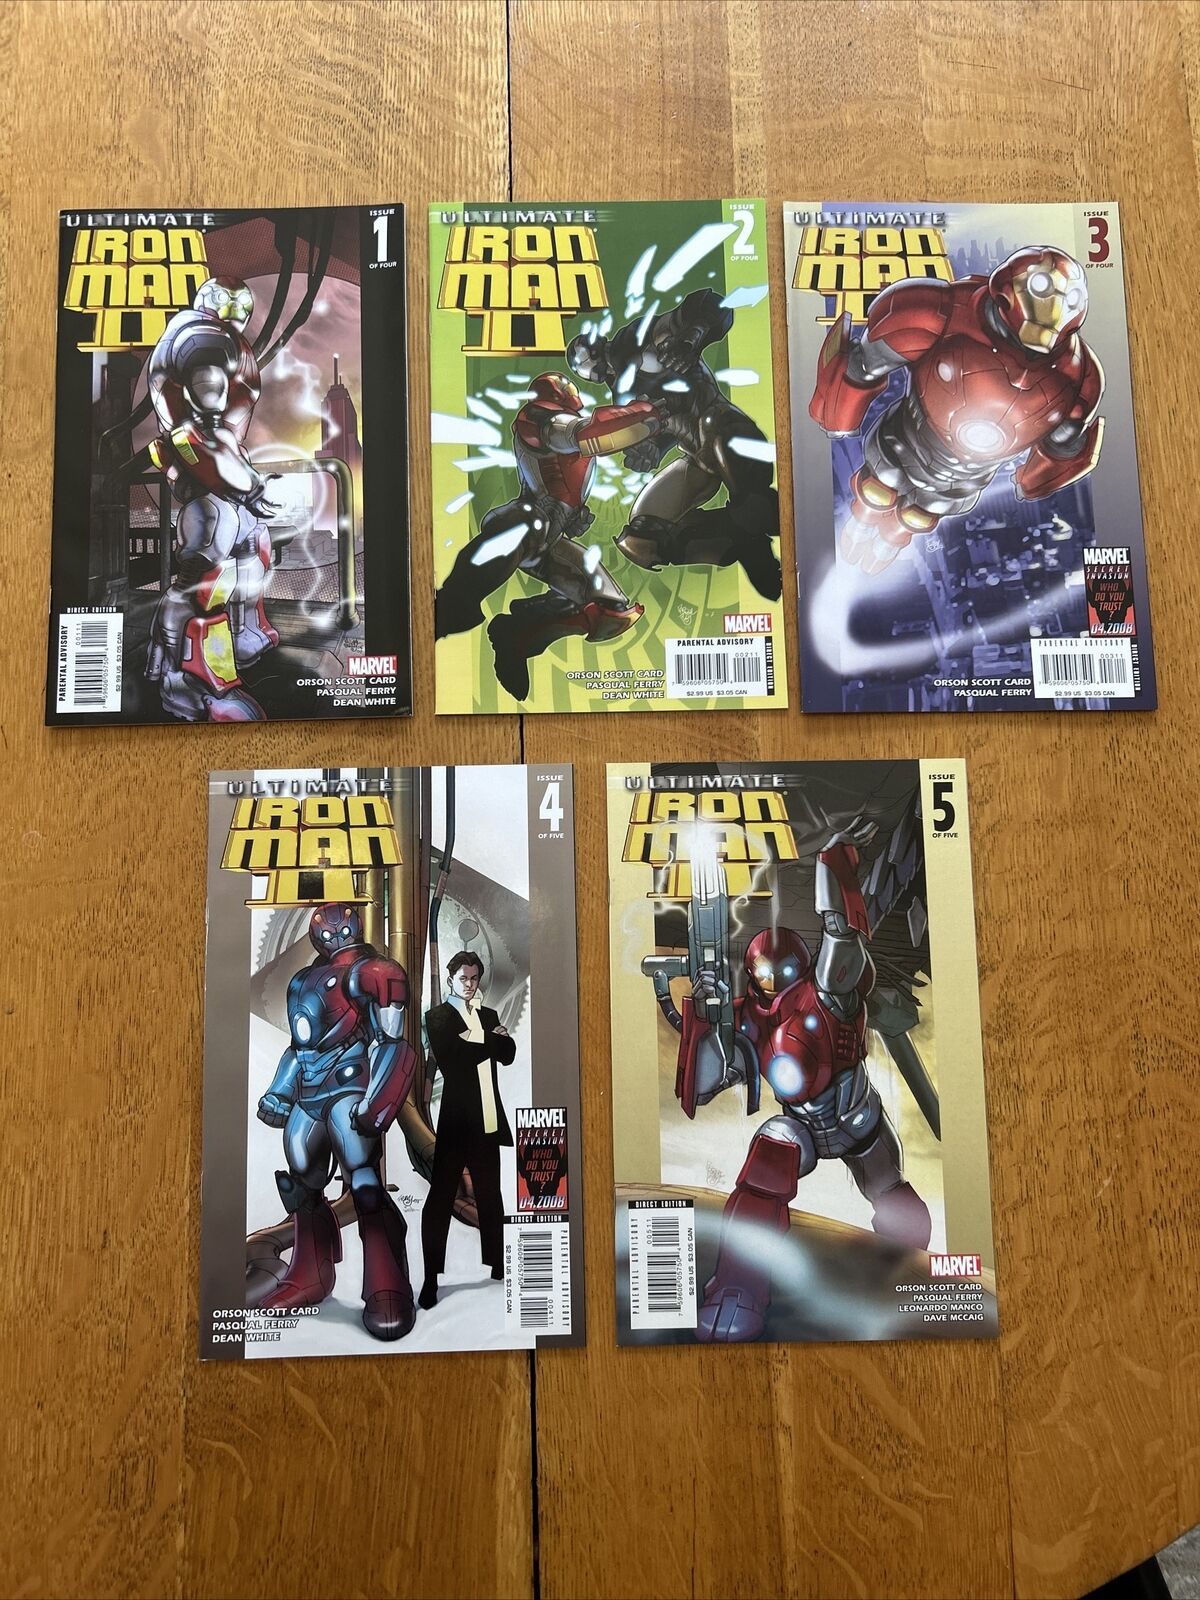 Ultimate Iron Man 2 (2008) #1-5, Complete Five Issue Series, VF-NM